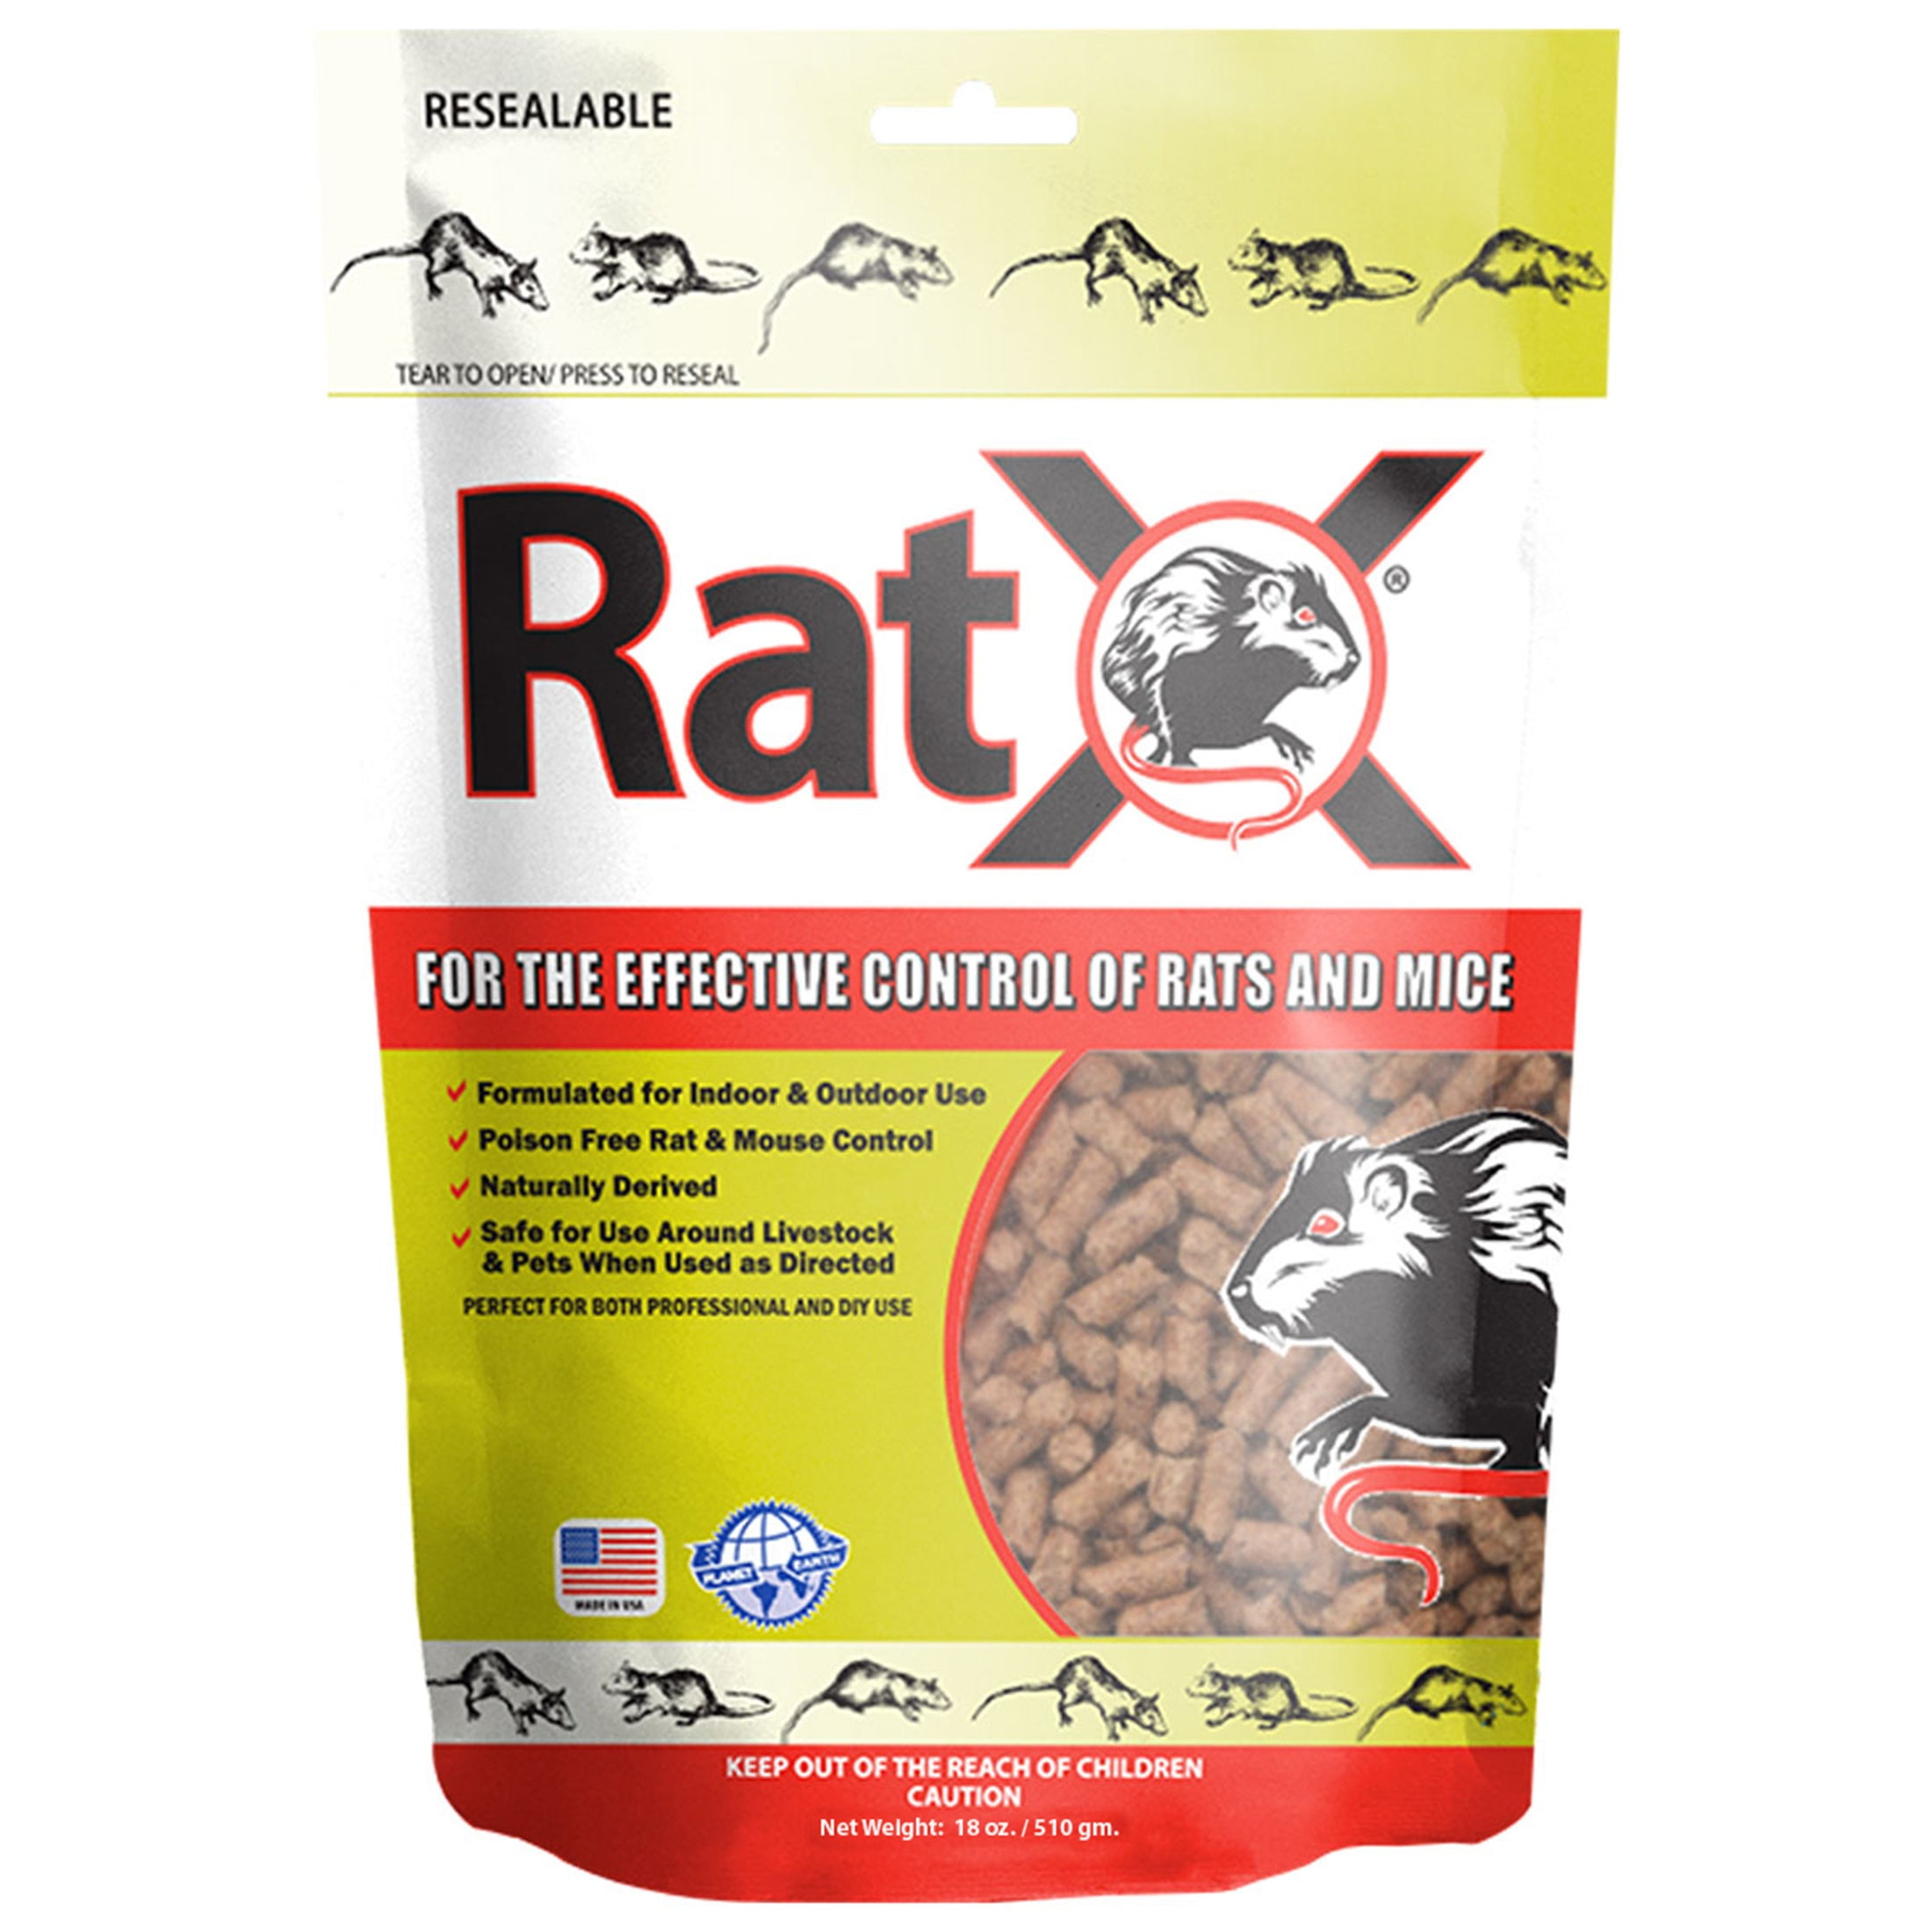 Mouse X Mouse Baits, Indoor and Outdoor - 1 lb